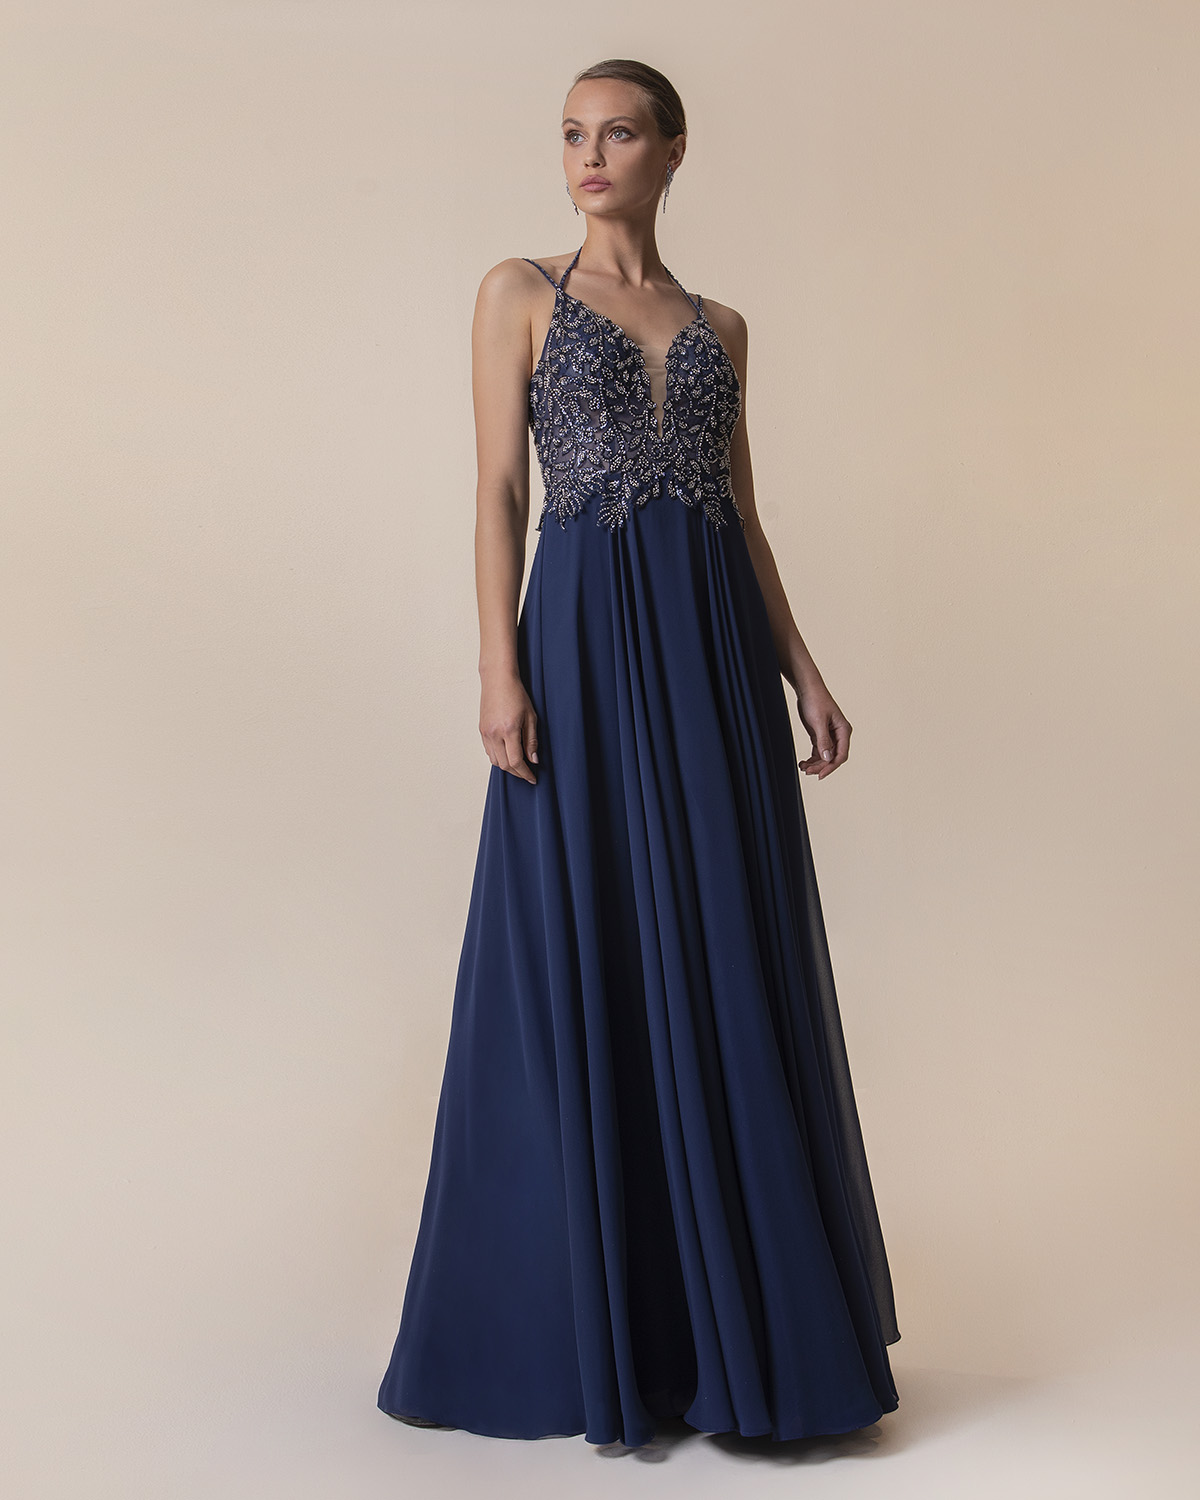 Long chiffon evening dress with fully beaded top